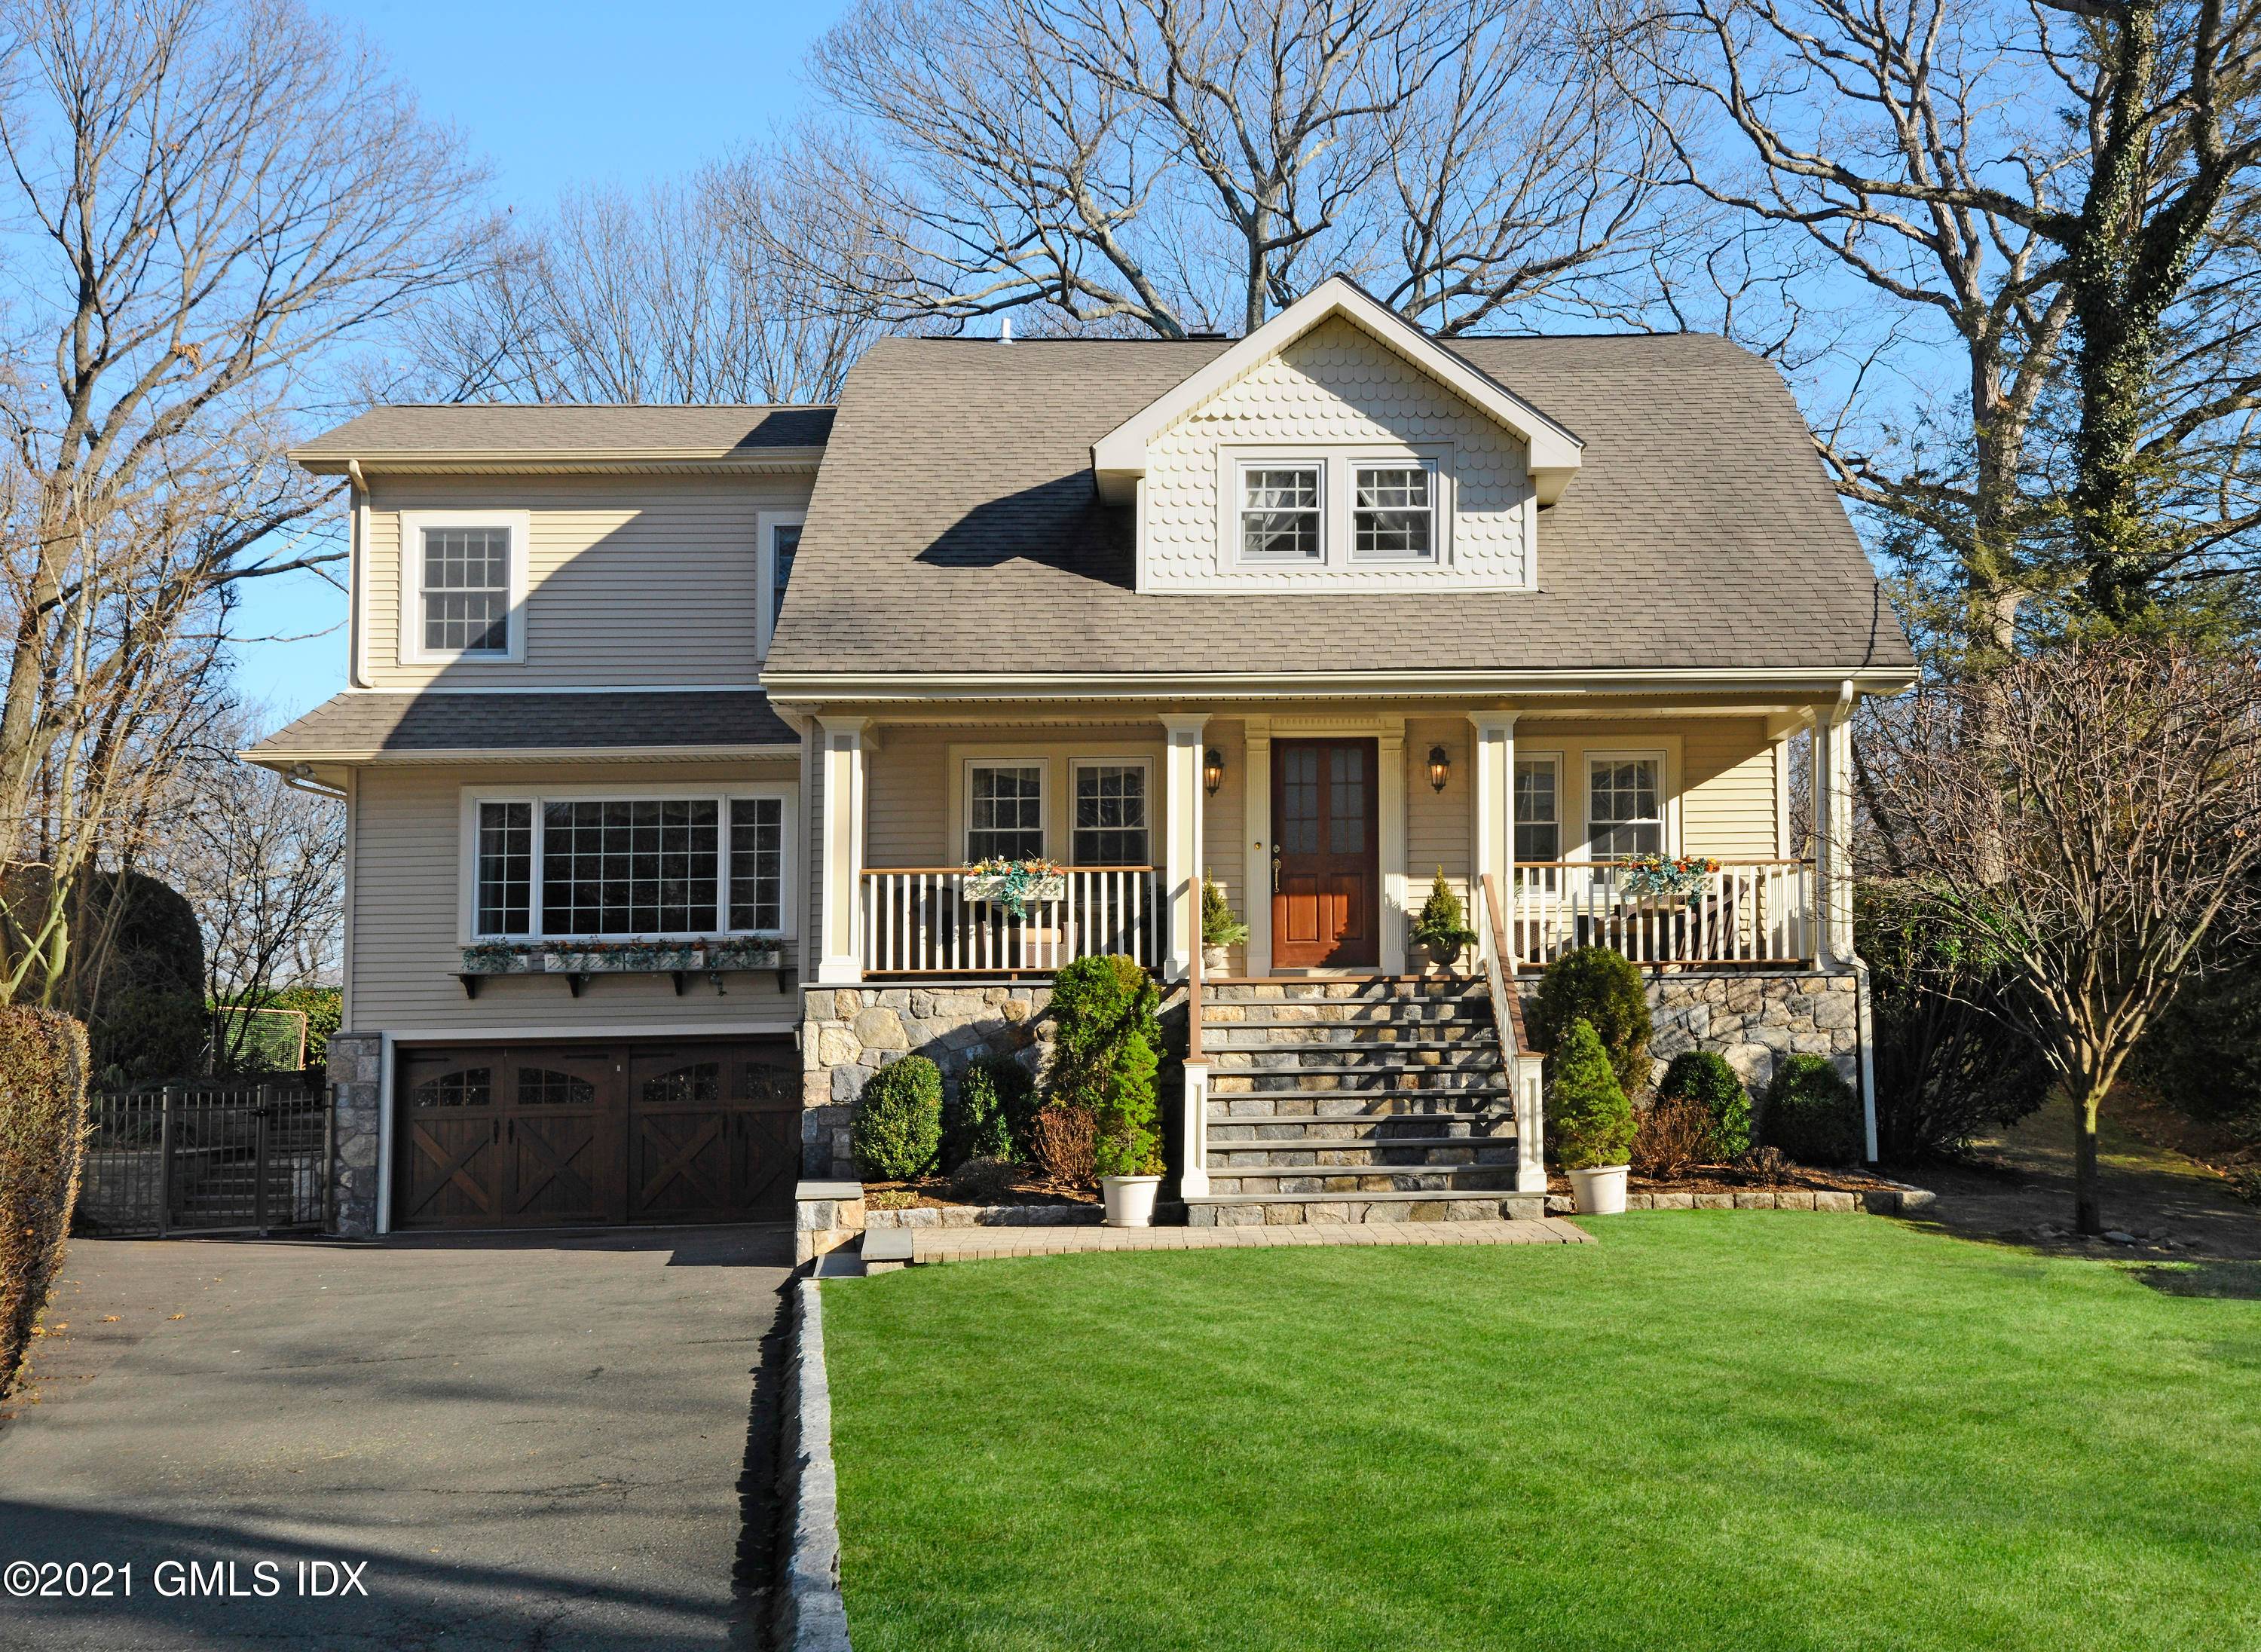 This 5 BR, 4 BA home is located on a quiet cul de sac off Valleywood Rd.